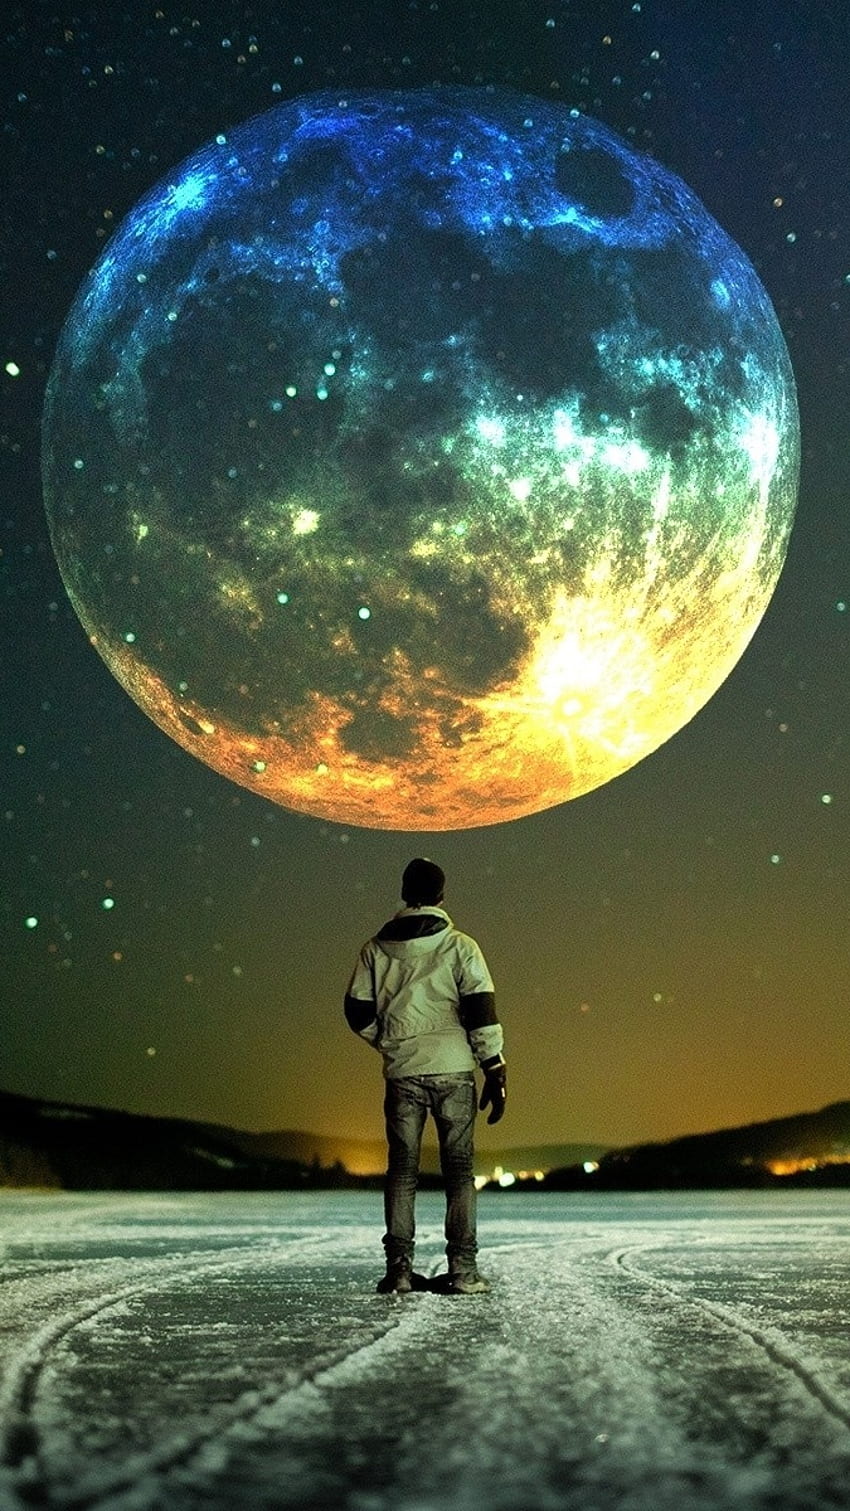 Details more than 83 man on the moon wallpaper super hot - in.coedo.com.vn